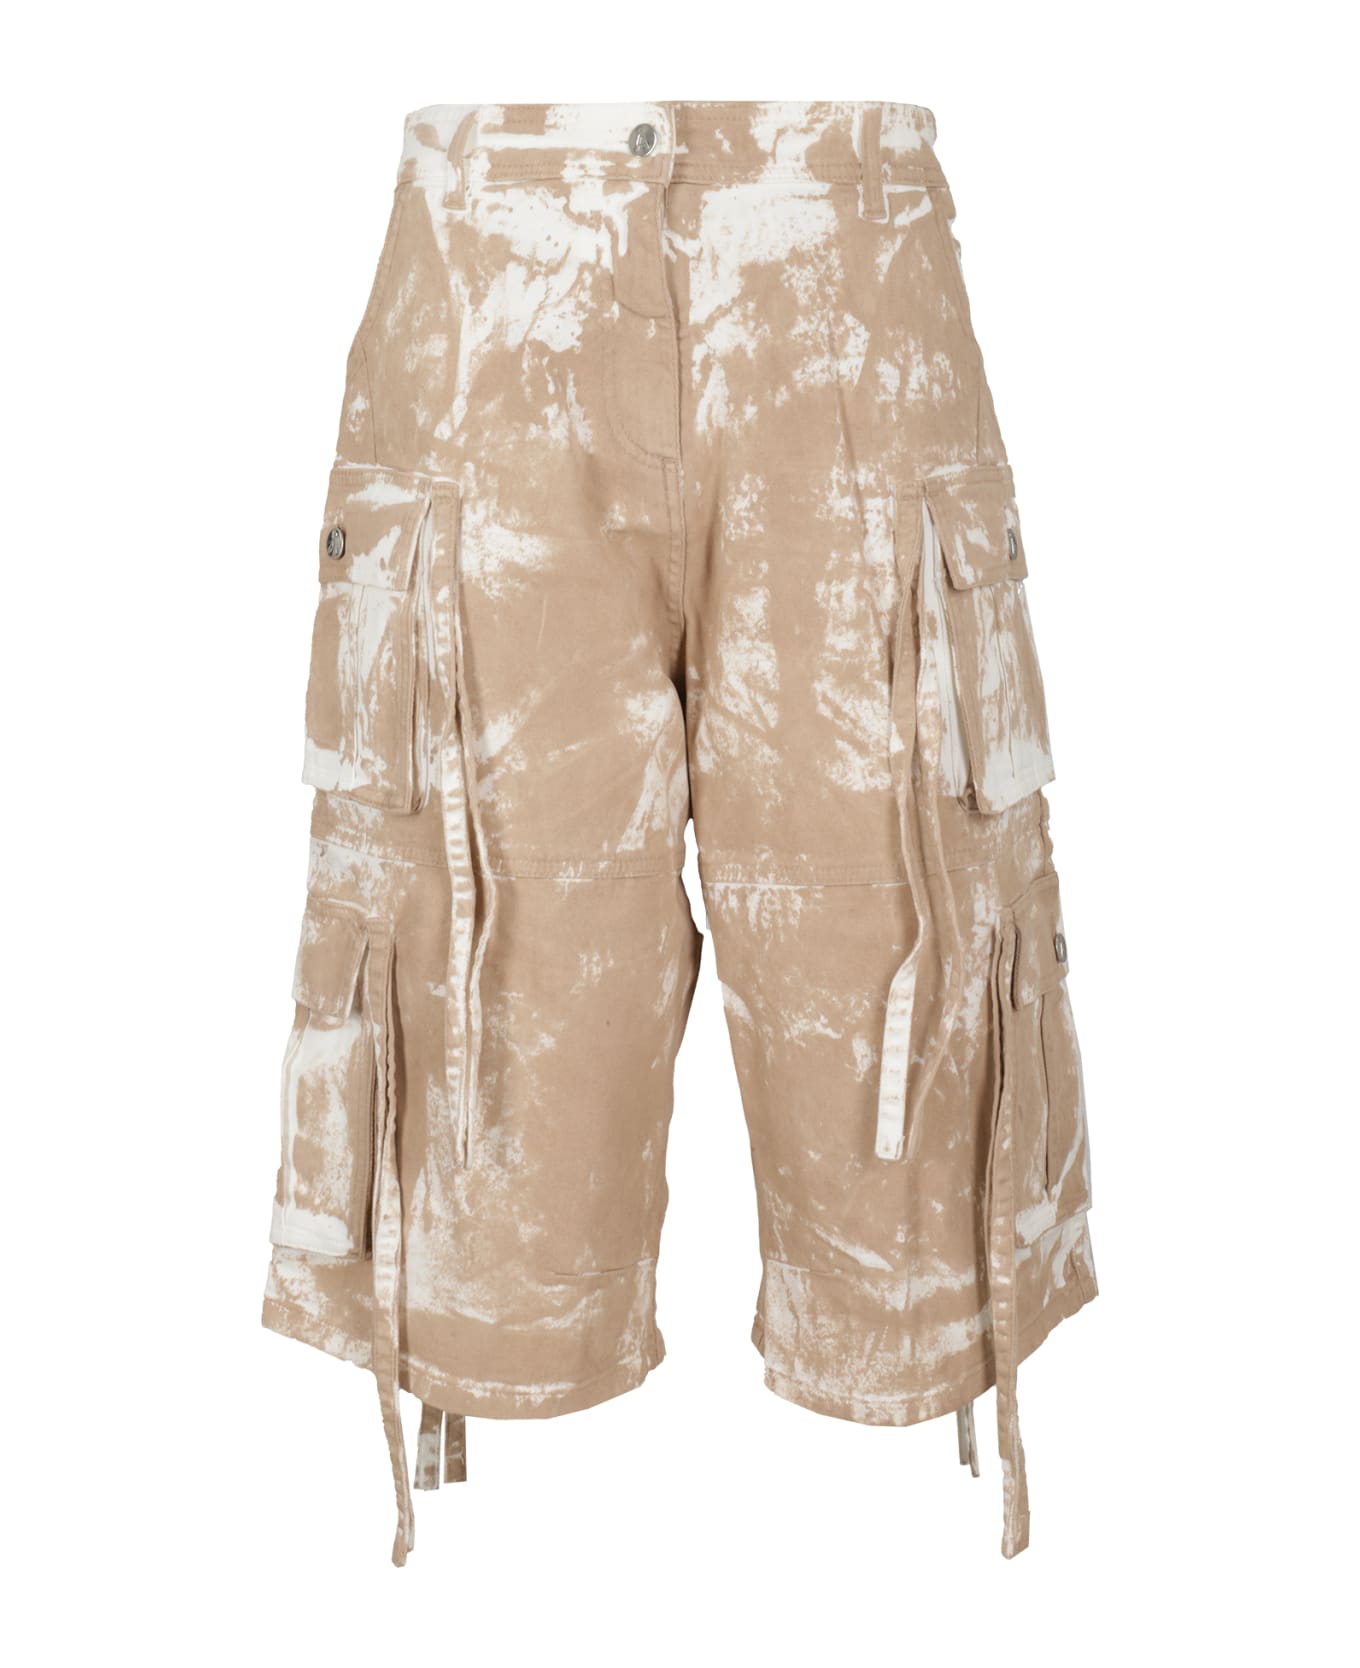 ANDREĀDAMO Washed Nude Drill Short - Washed Nude